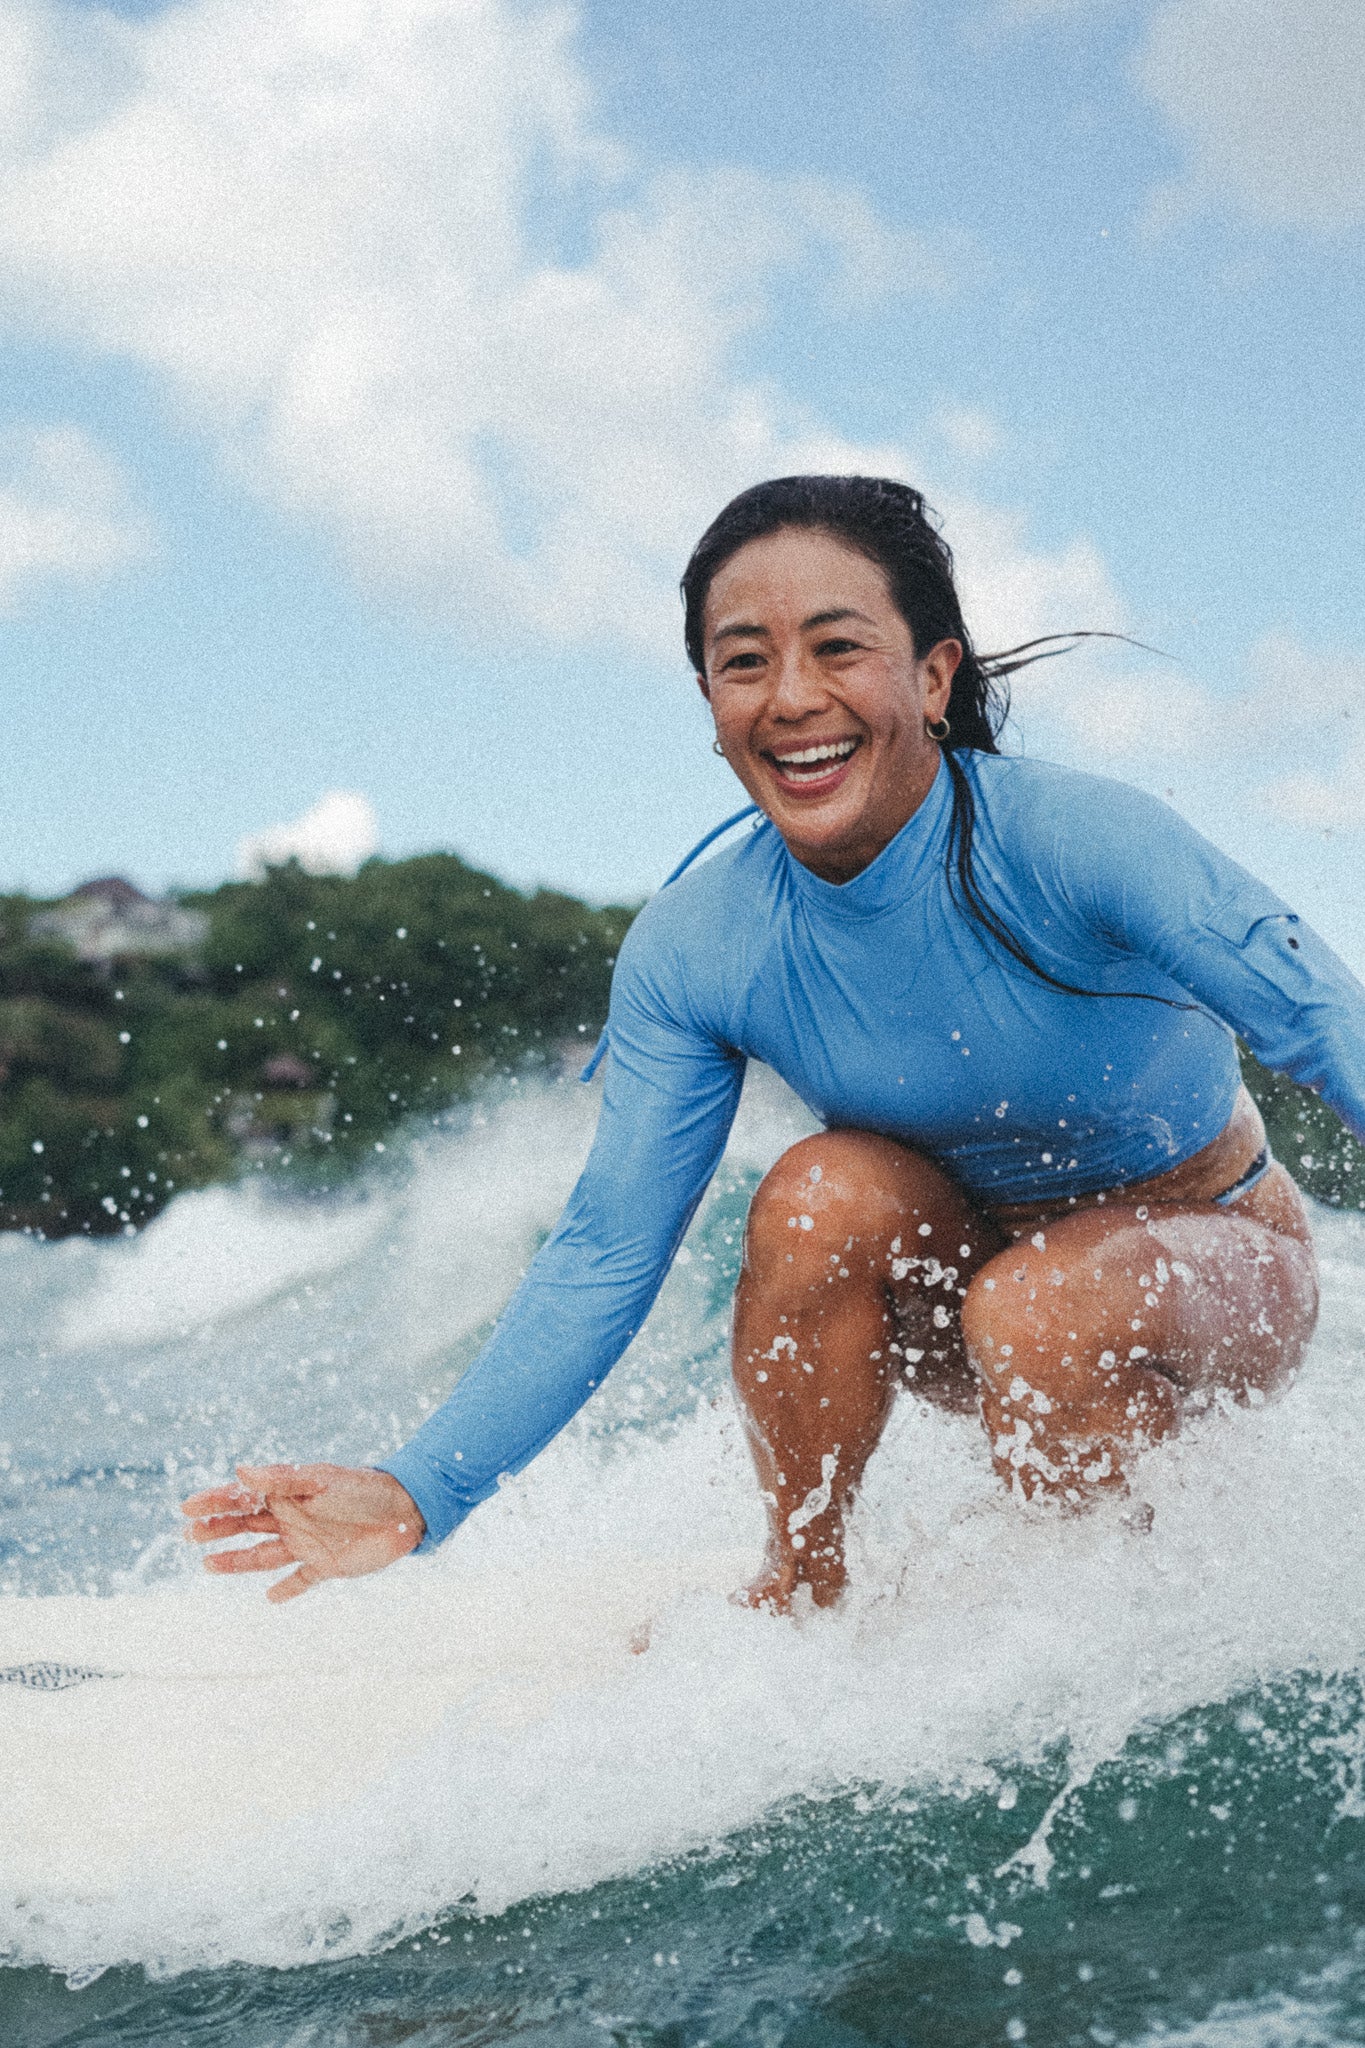 woman smiling and surfing wearing the putu turtleneck top in blue